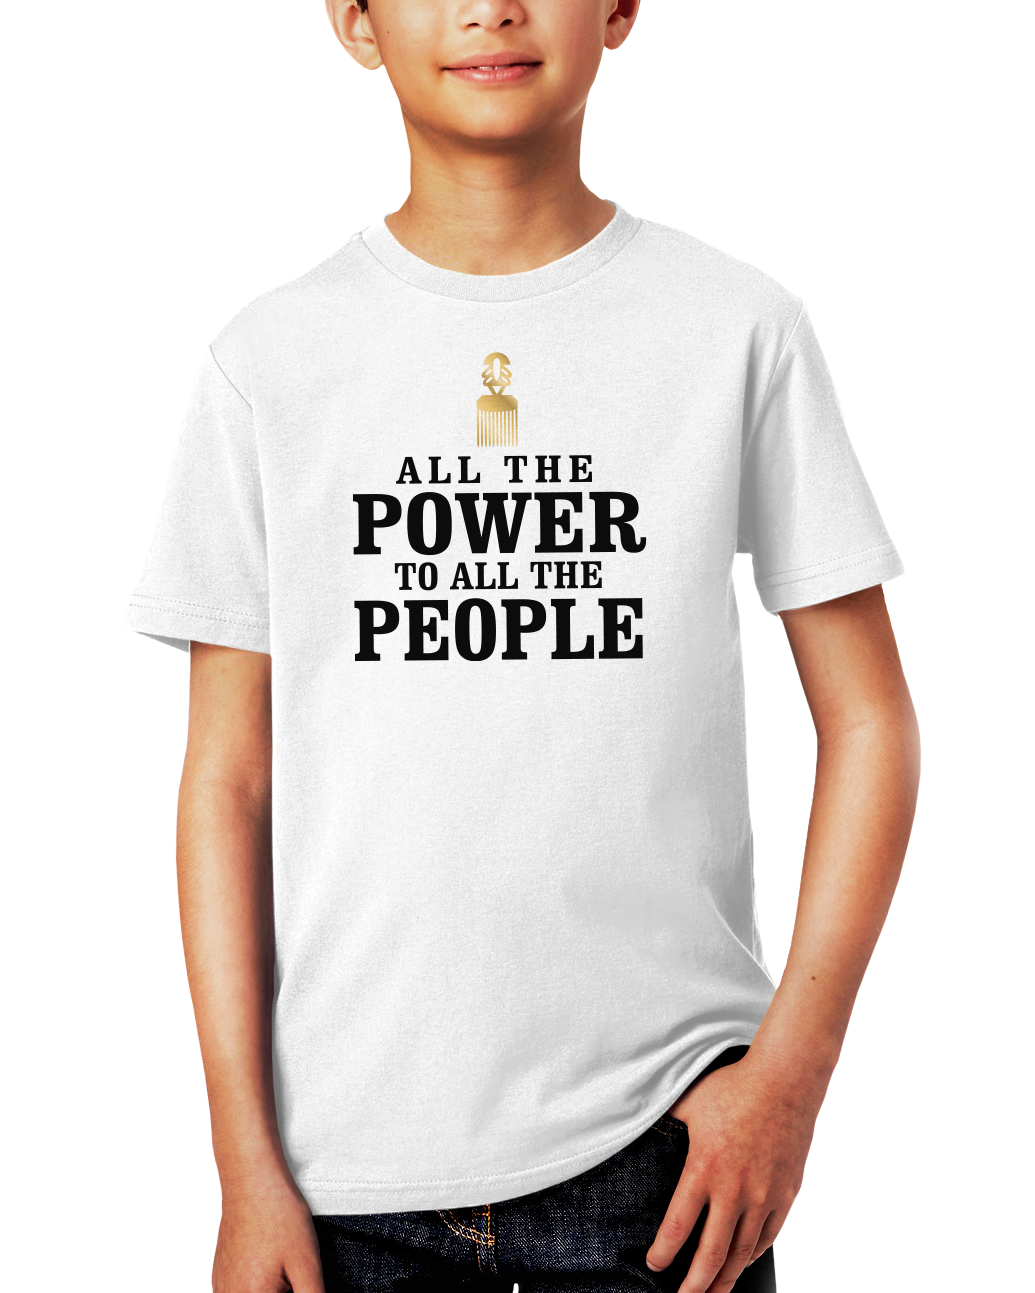 All The Power To All The People (BST)